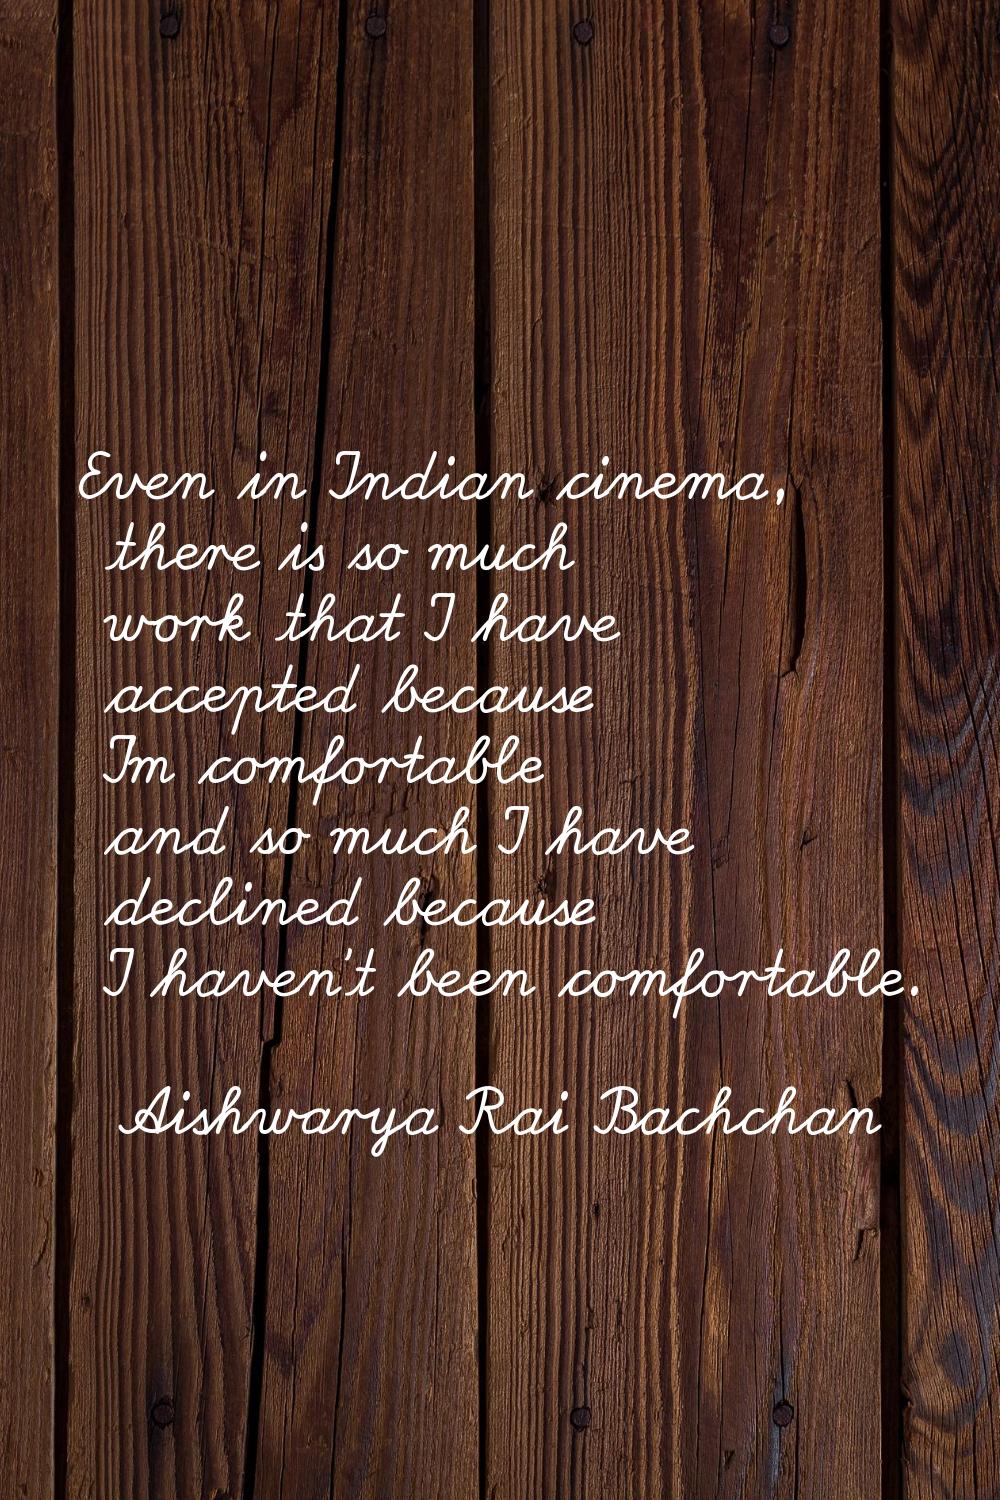 Even in Indian cinema, there is so much work that I have accepted because I'm comfortable and so mu